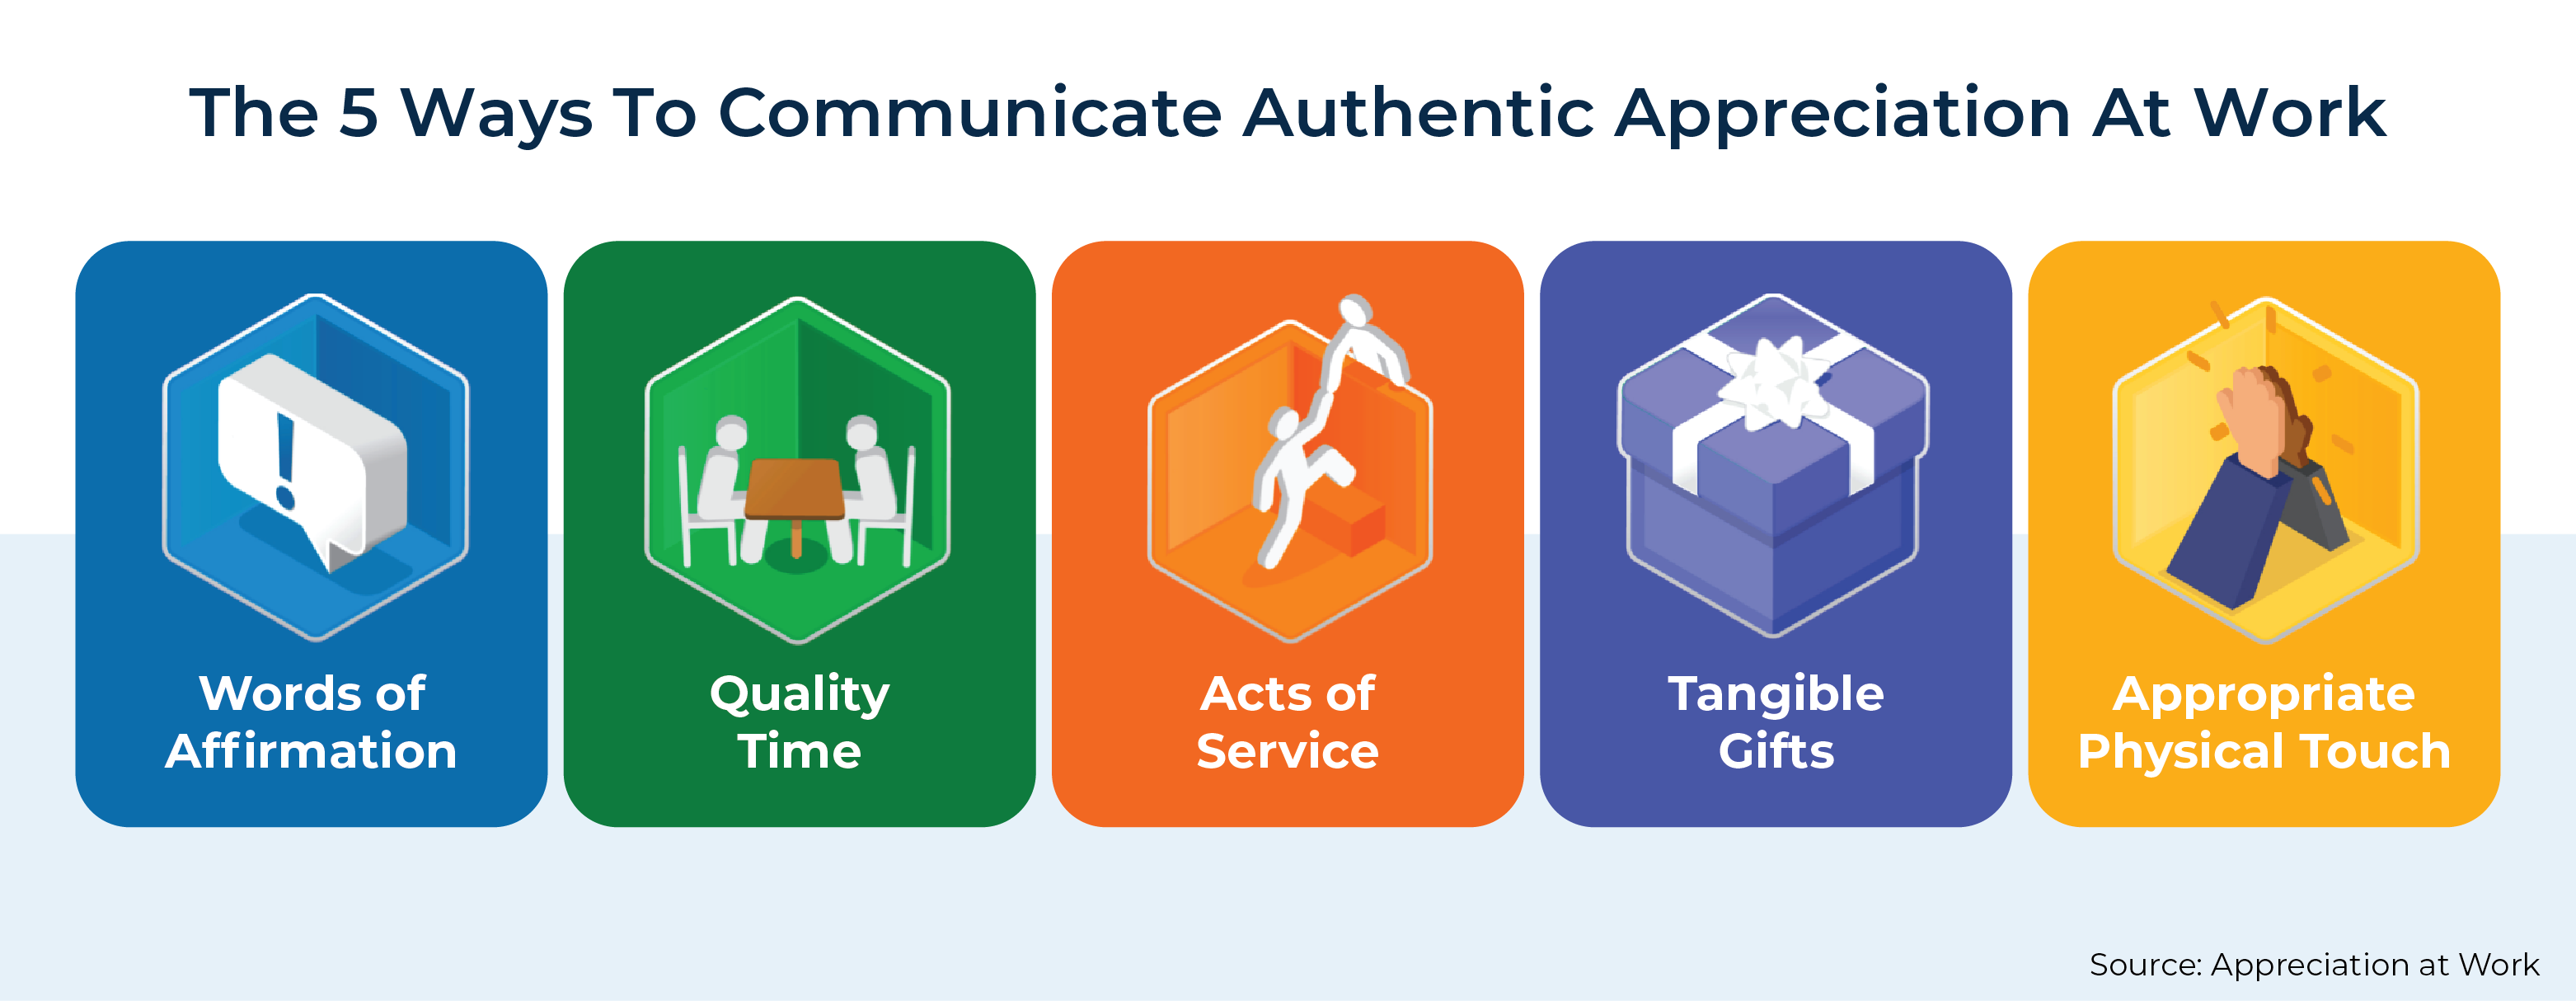 The Ways To Communicate Authentic Appreciation At Work